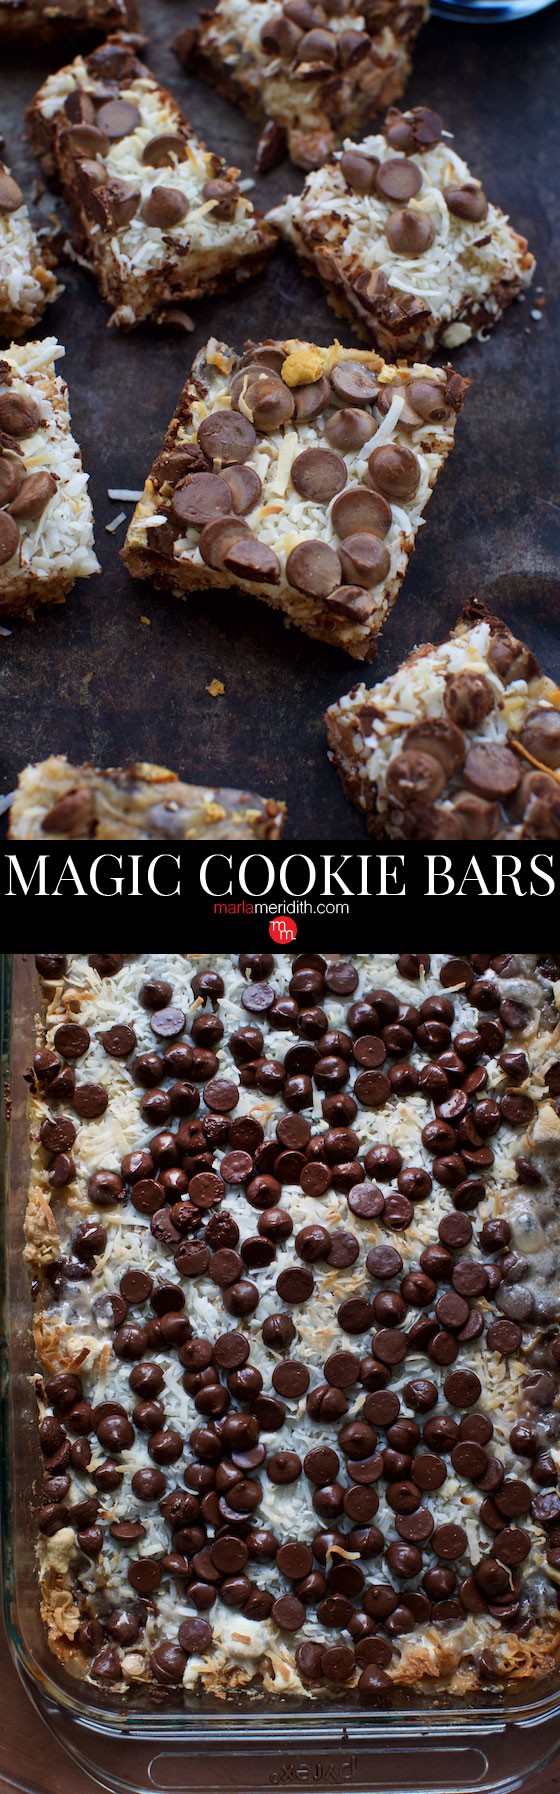 Magic Cookie Bars #recipe. Satisfy sweet teeth with the best #dessert ever! MarlaMeridith.com ( @marlameridith )